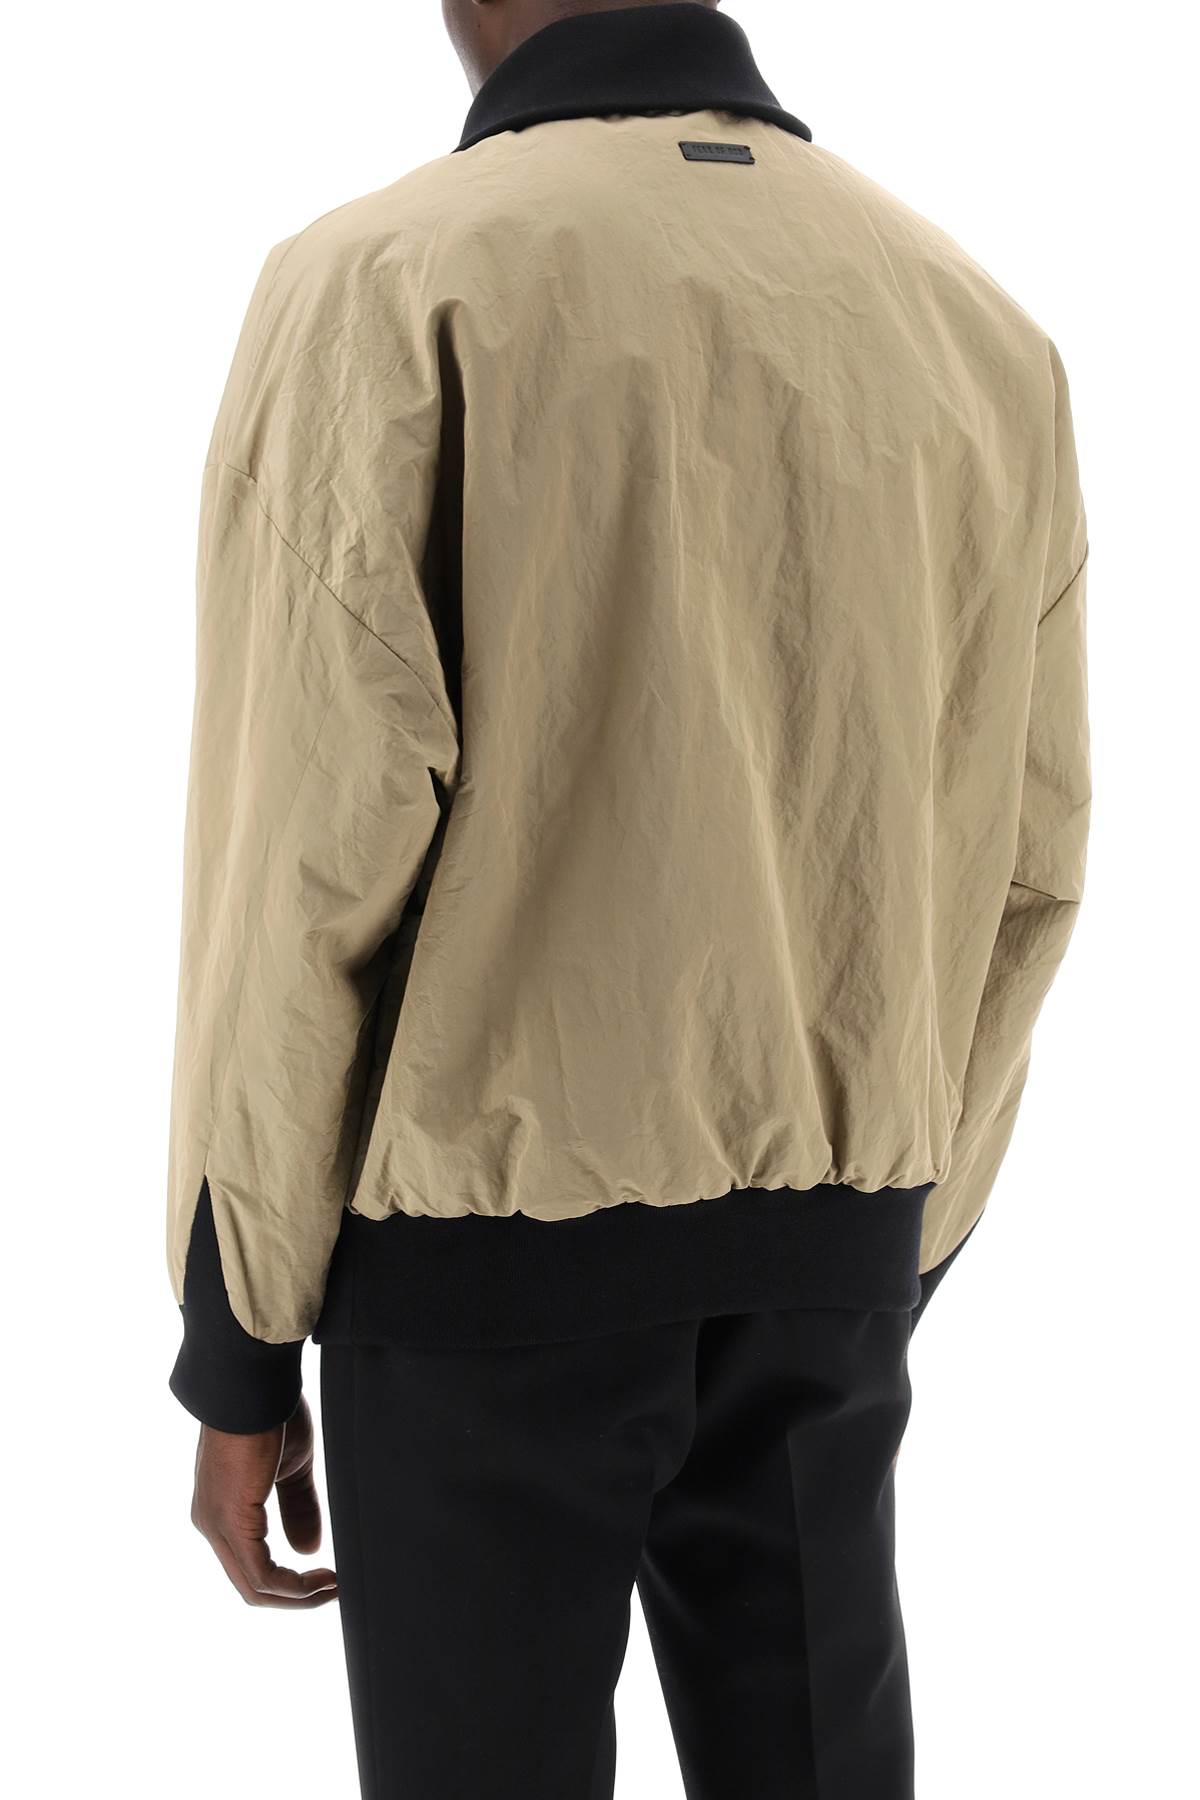 Fear of god "half-zip track jacket with irides-2